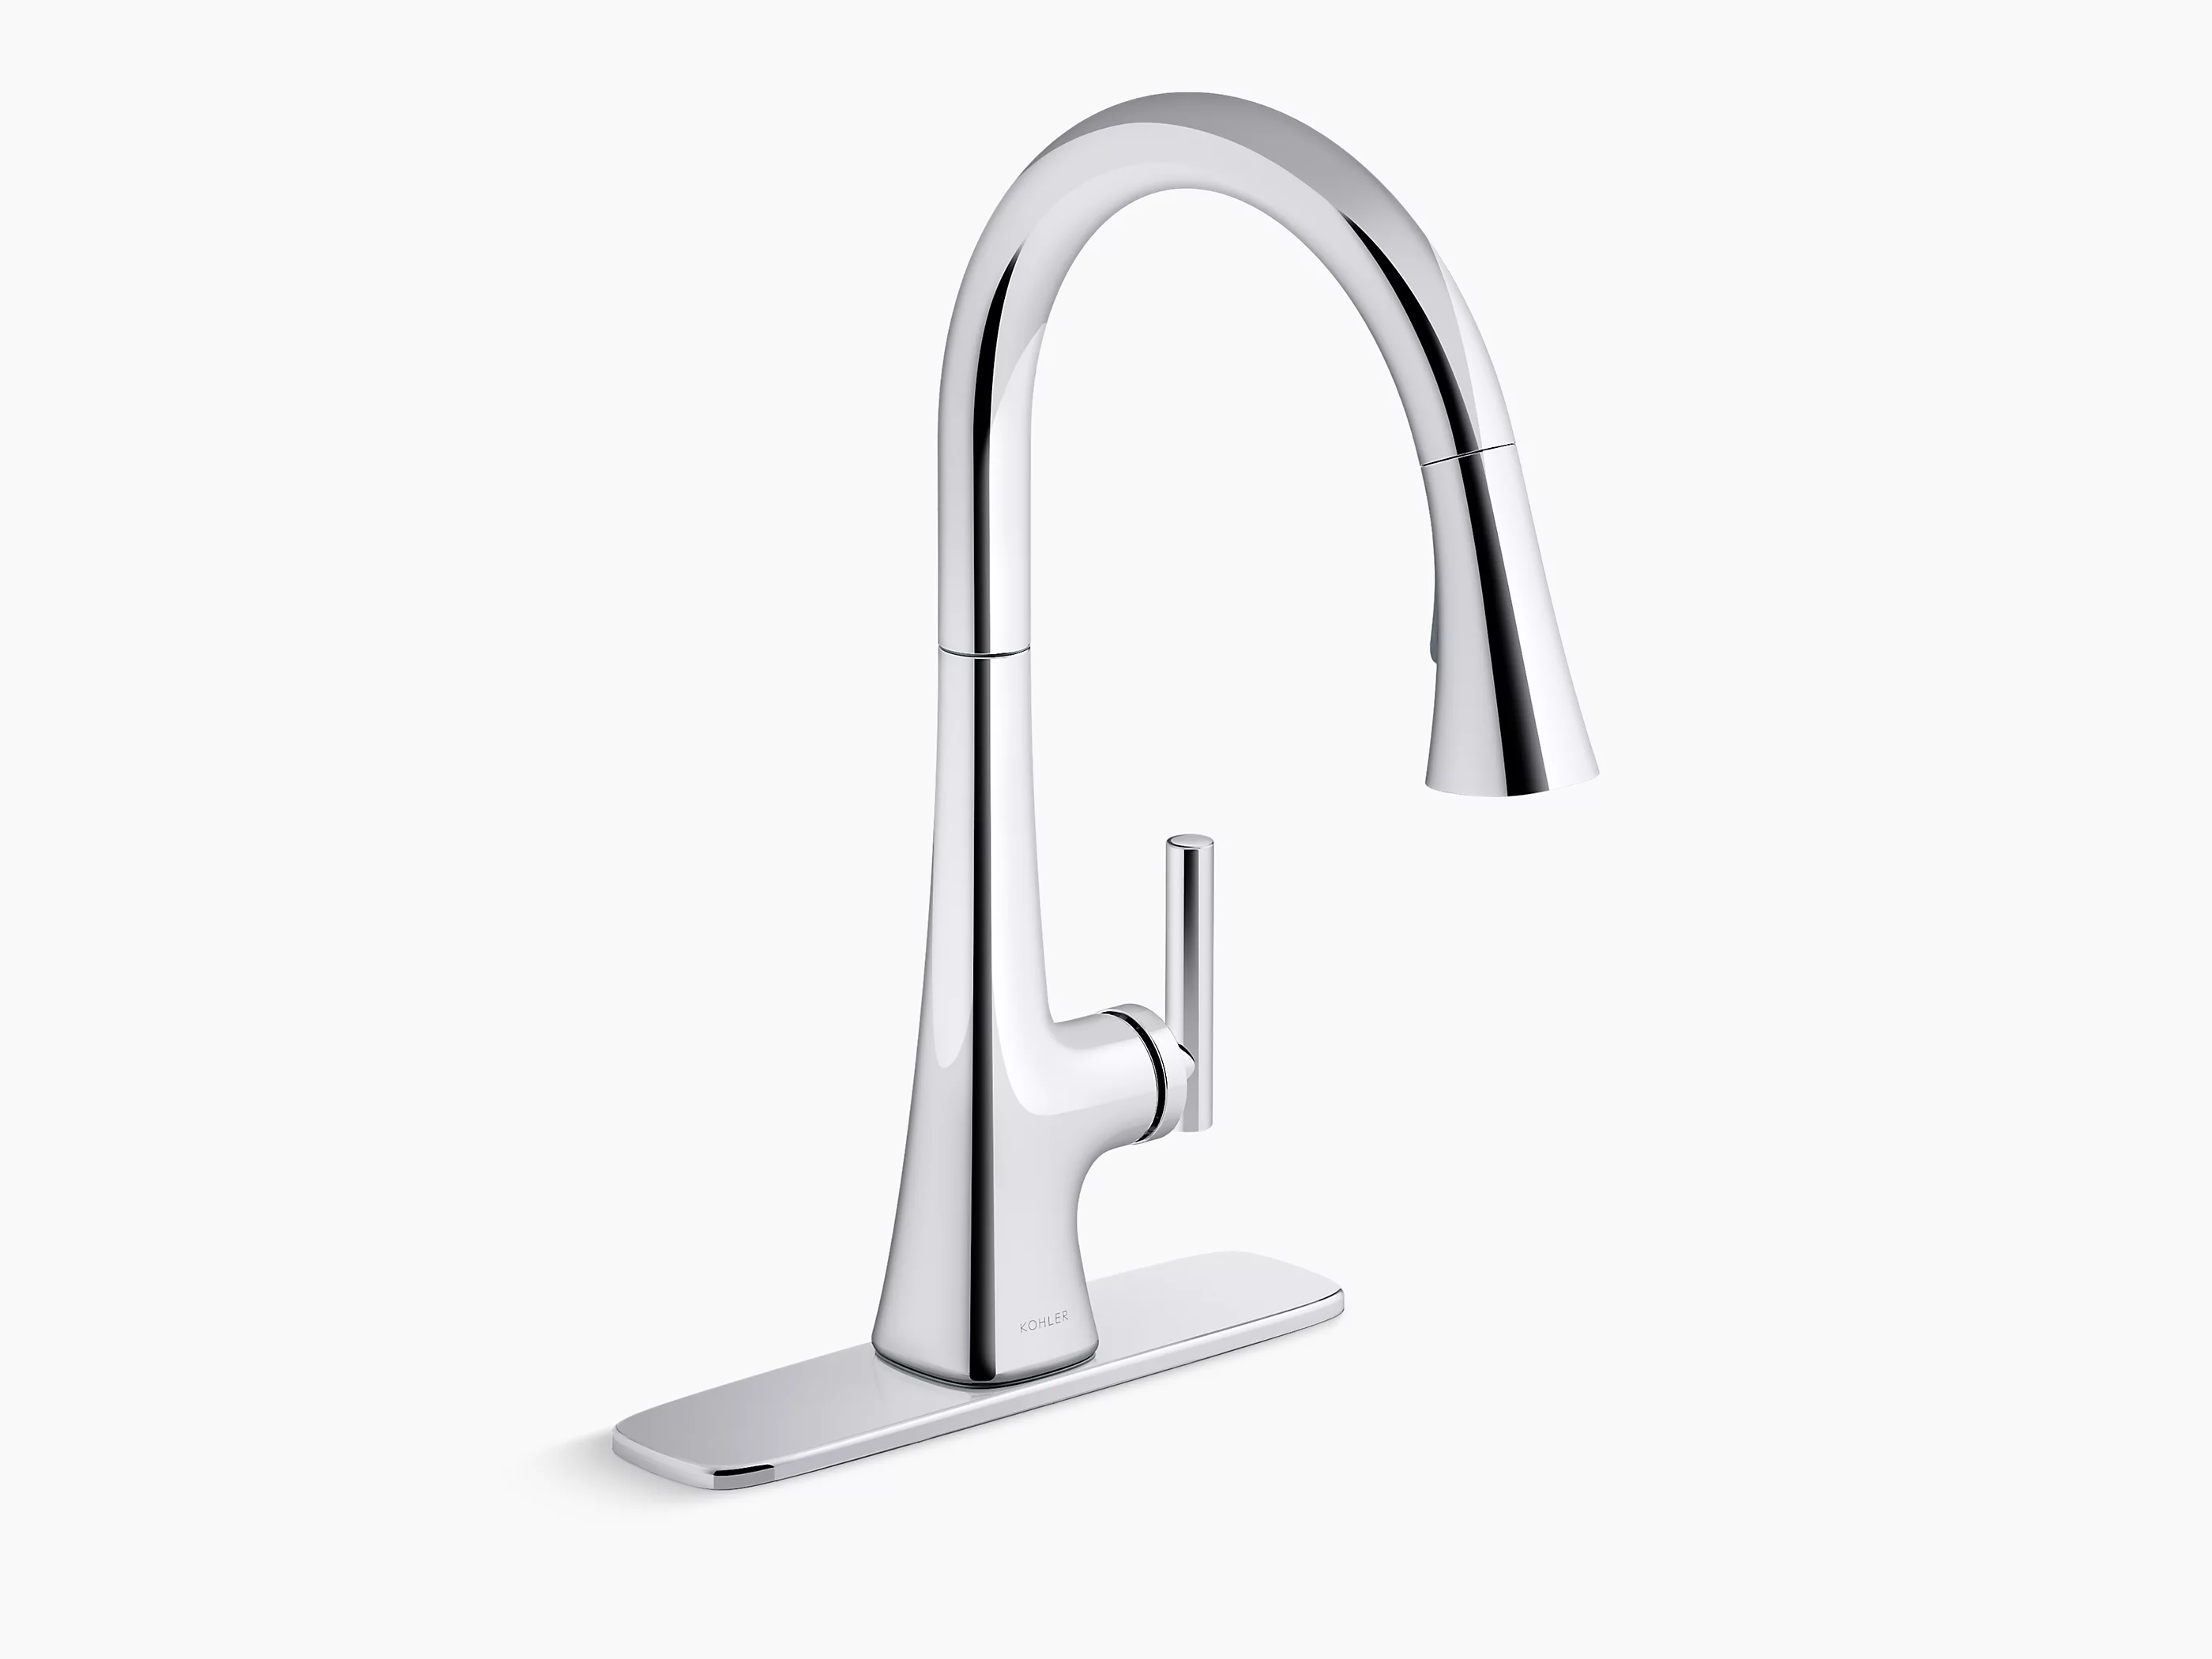 Conti Pull Down Kitchen Sink Faucet